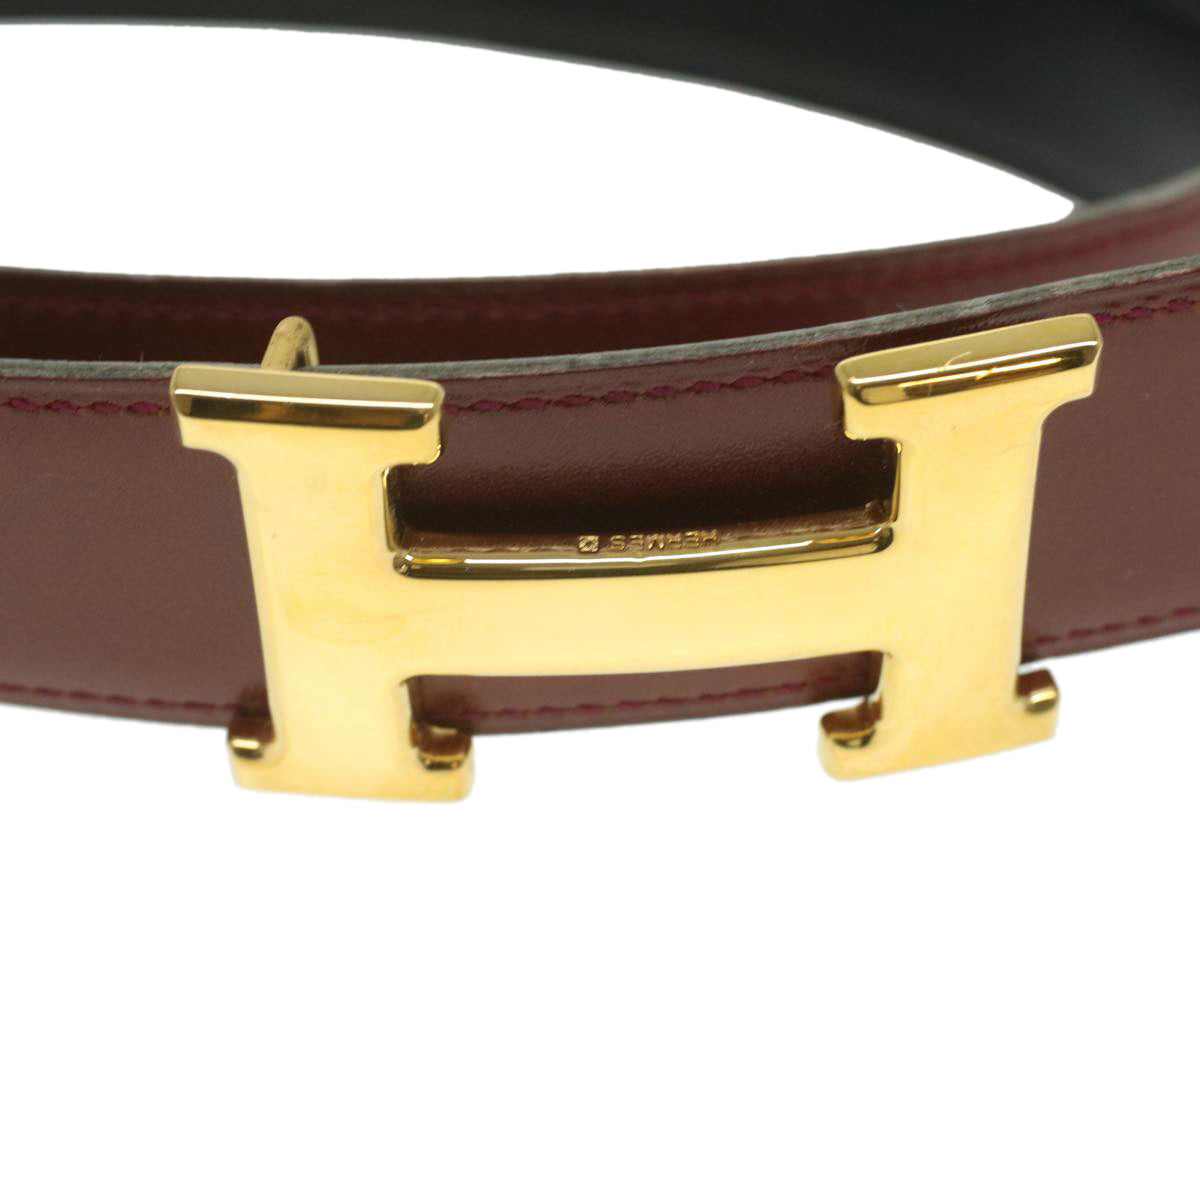 HERMES Belt Leather 29.5"" Red Auth am3774